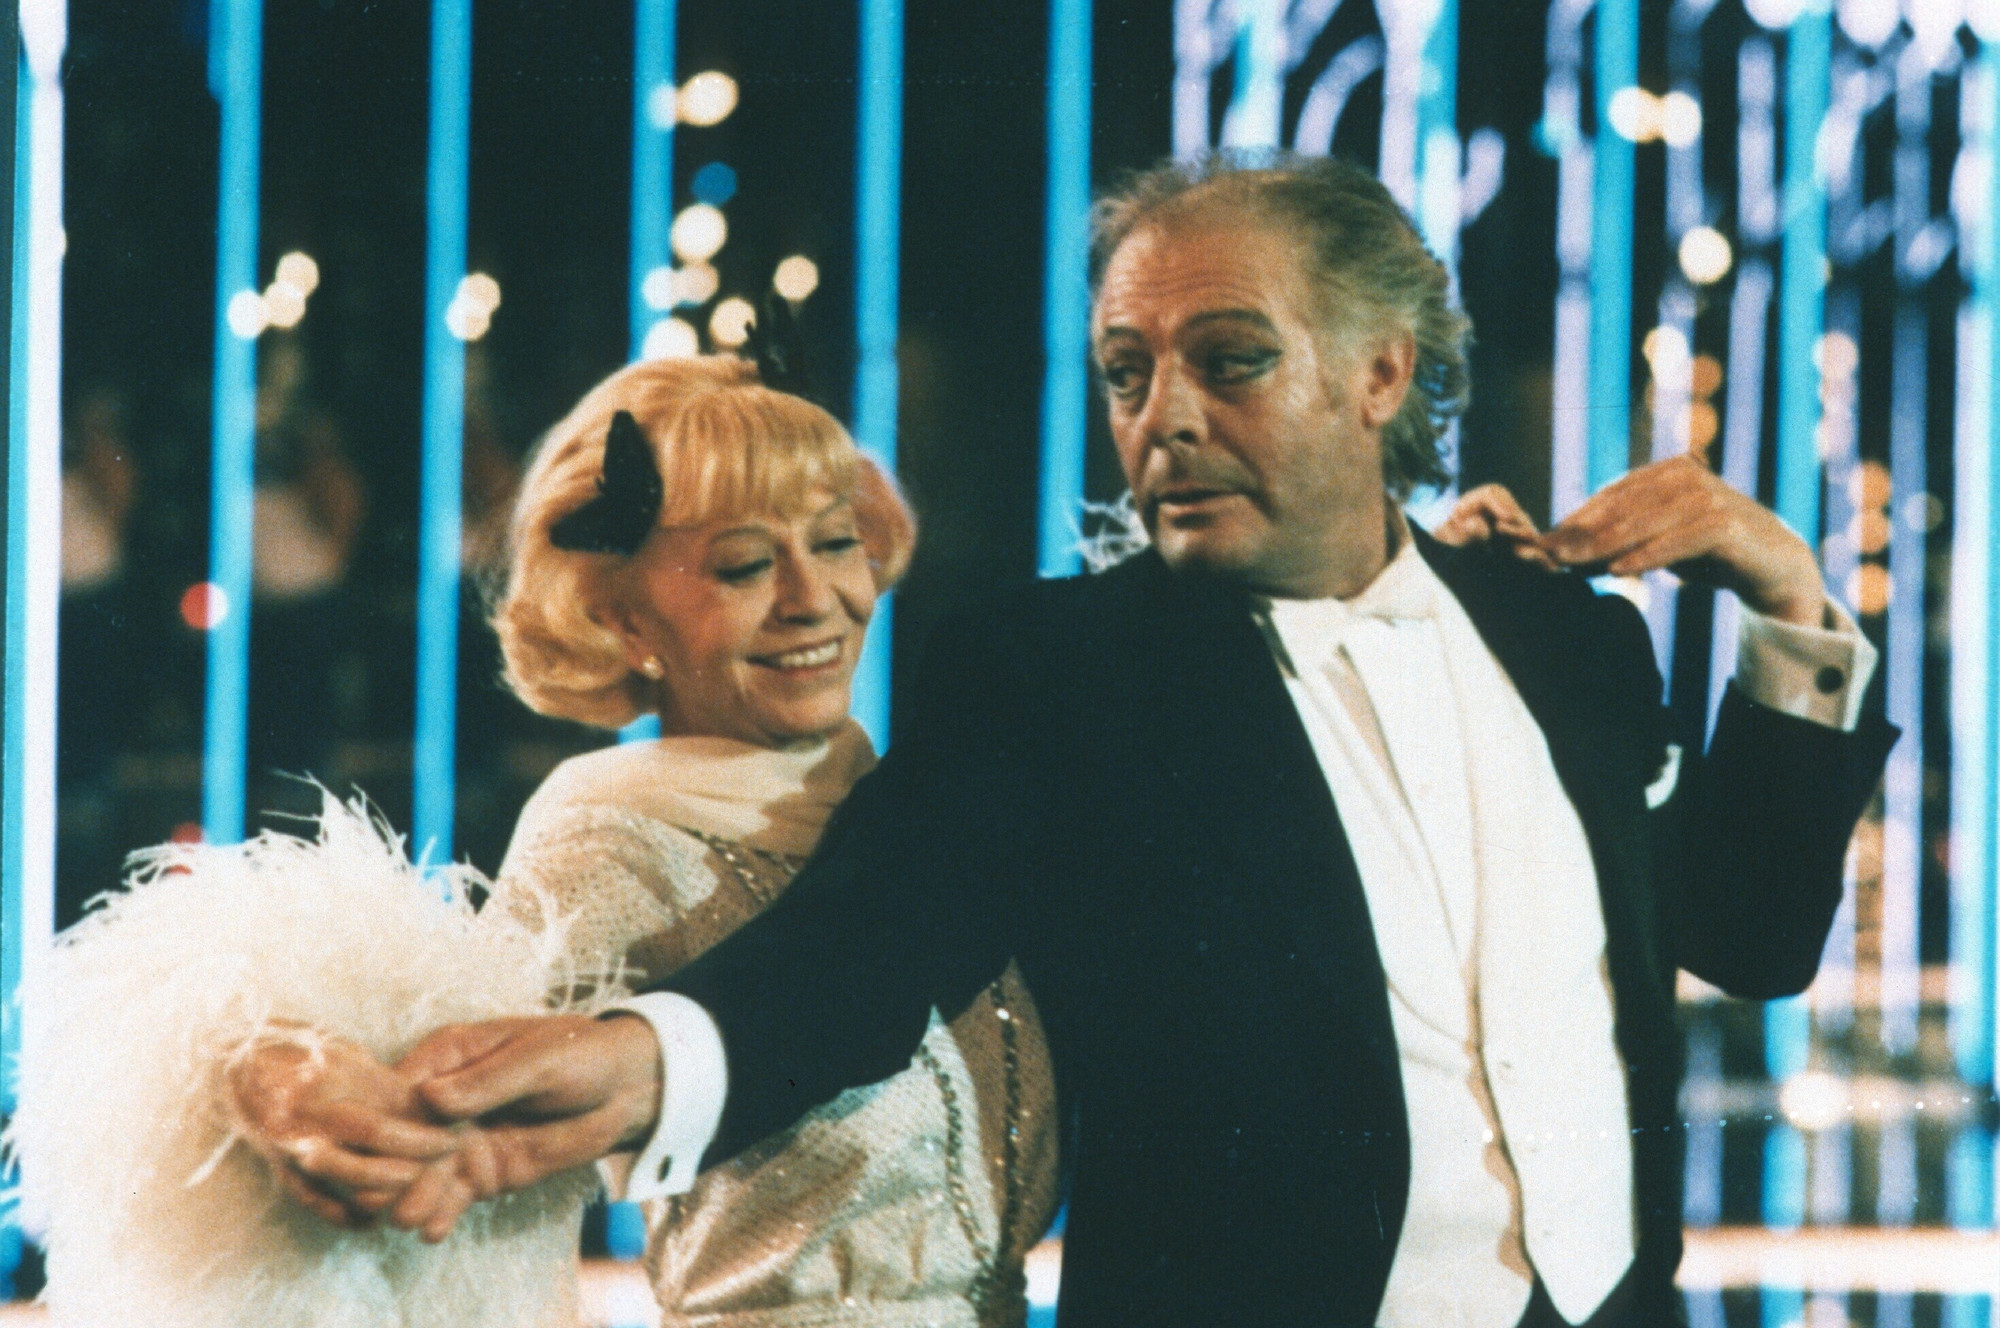 Verhuizer Stamboom min Ginger e Fred (Ginger and Fred). 1986. Directed by Federico Fellini | MoMA